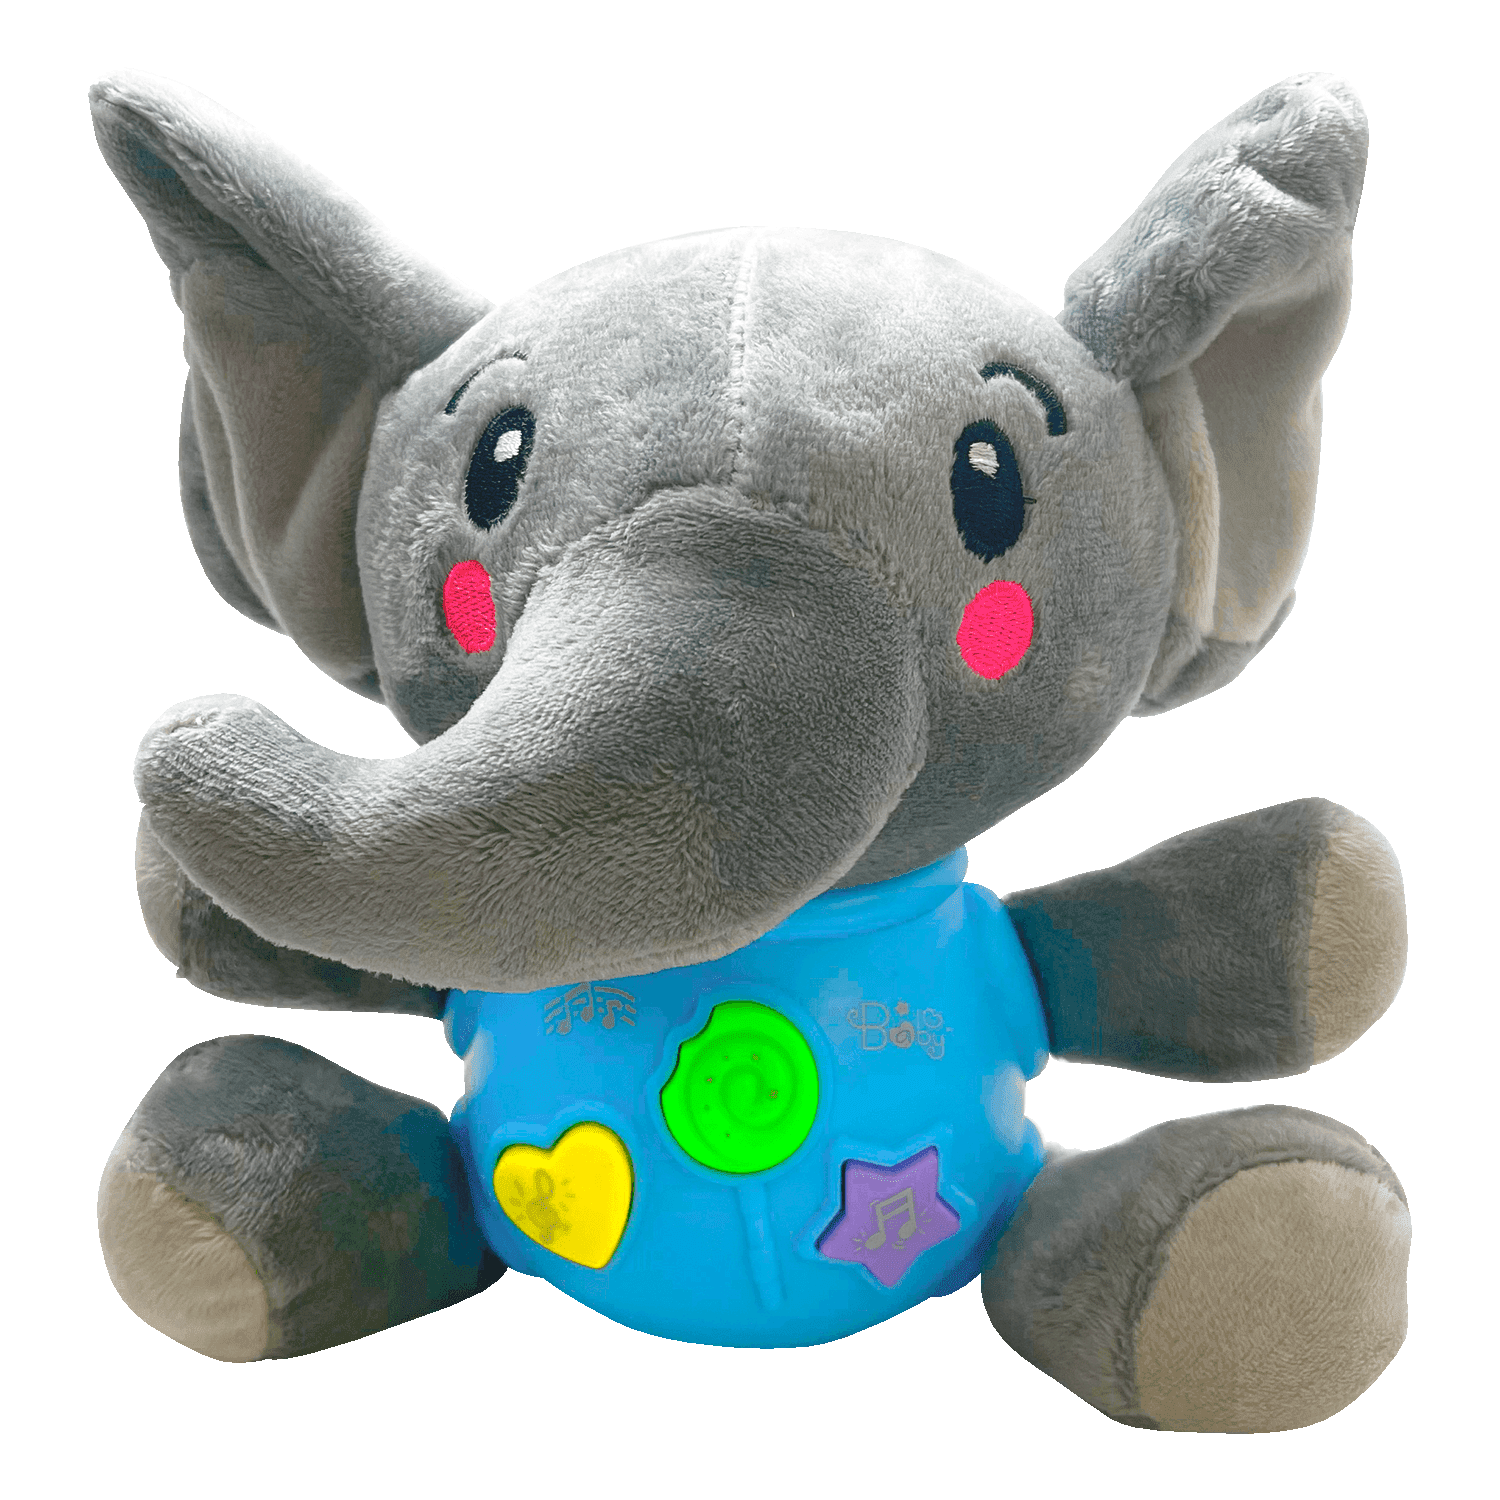 Lotus Baby Musical Plush Stuffed Elephant Animal Toy for 0 3 6 9 12 Months, Baby Musical Infant Toys